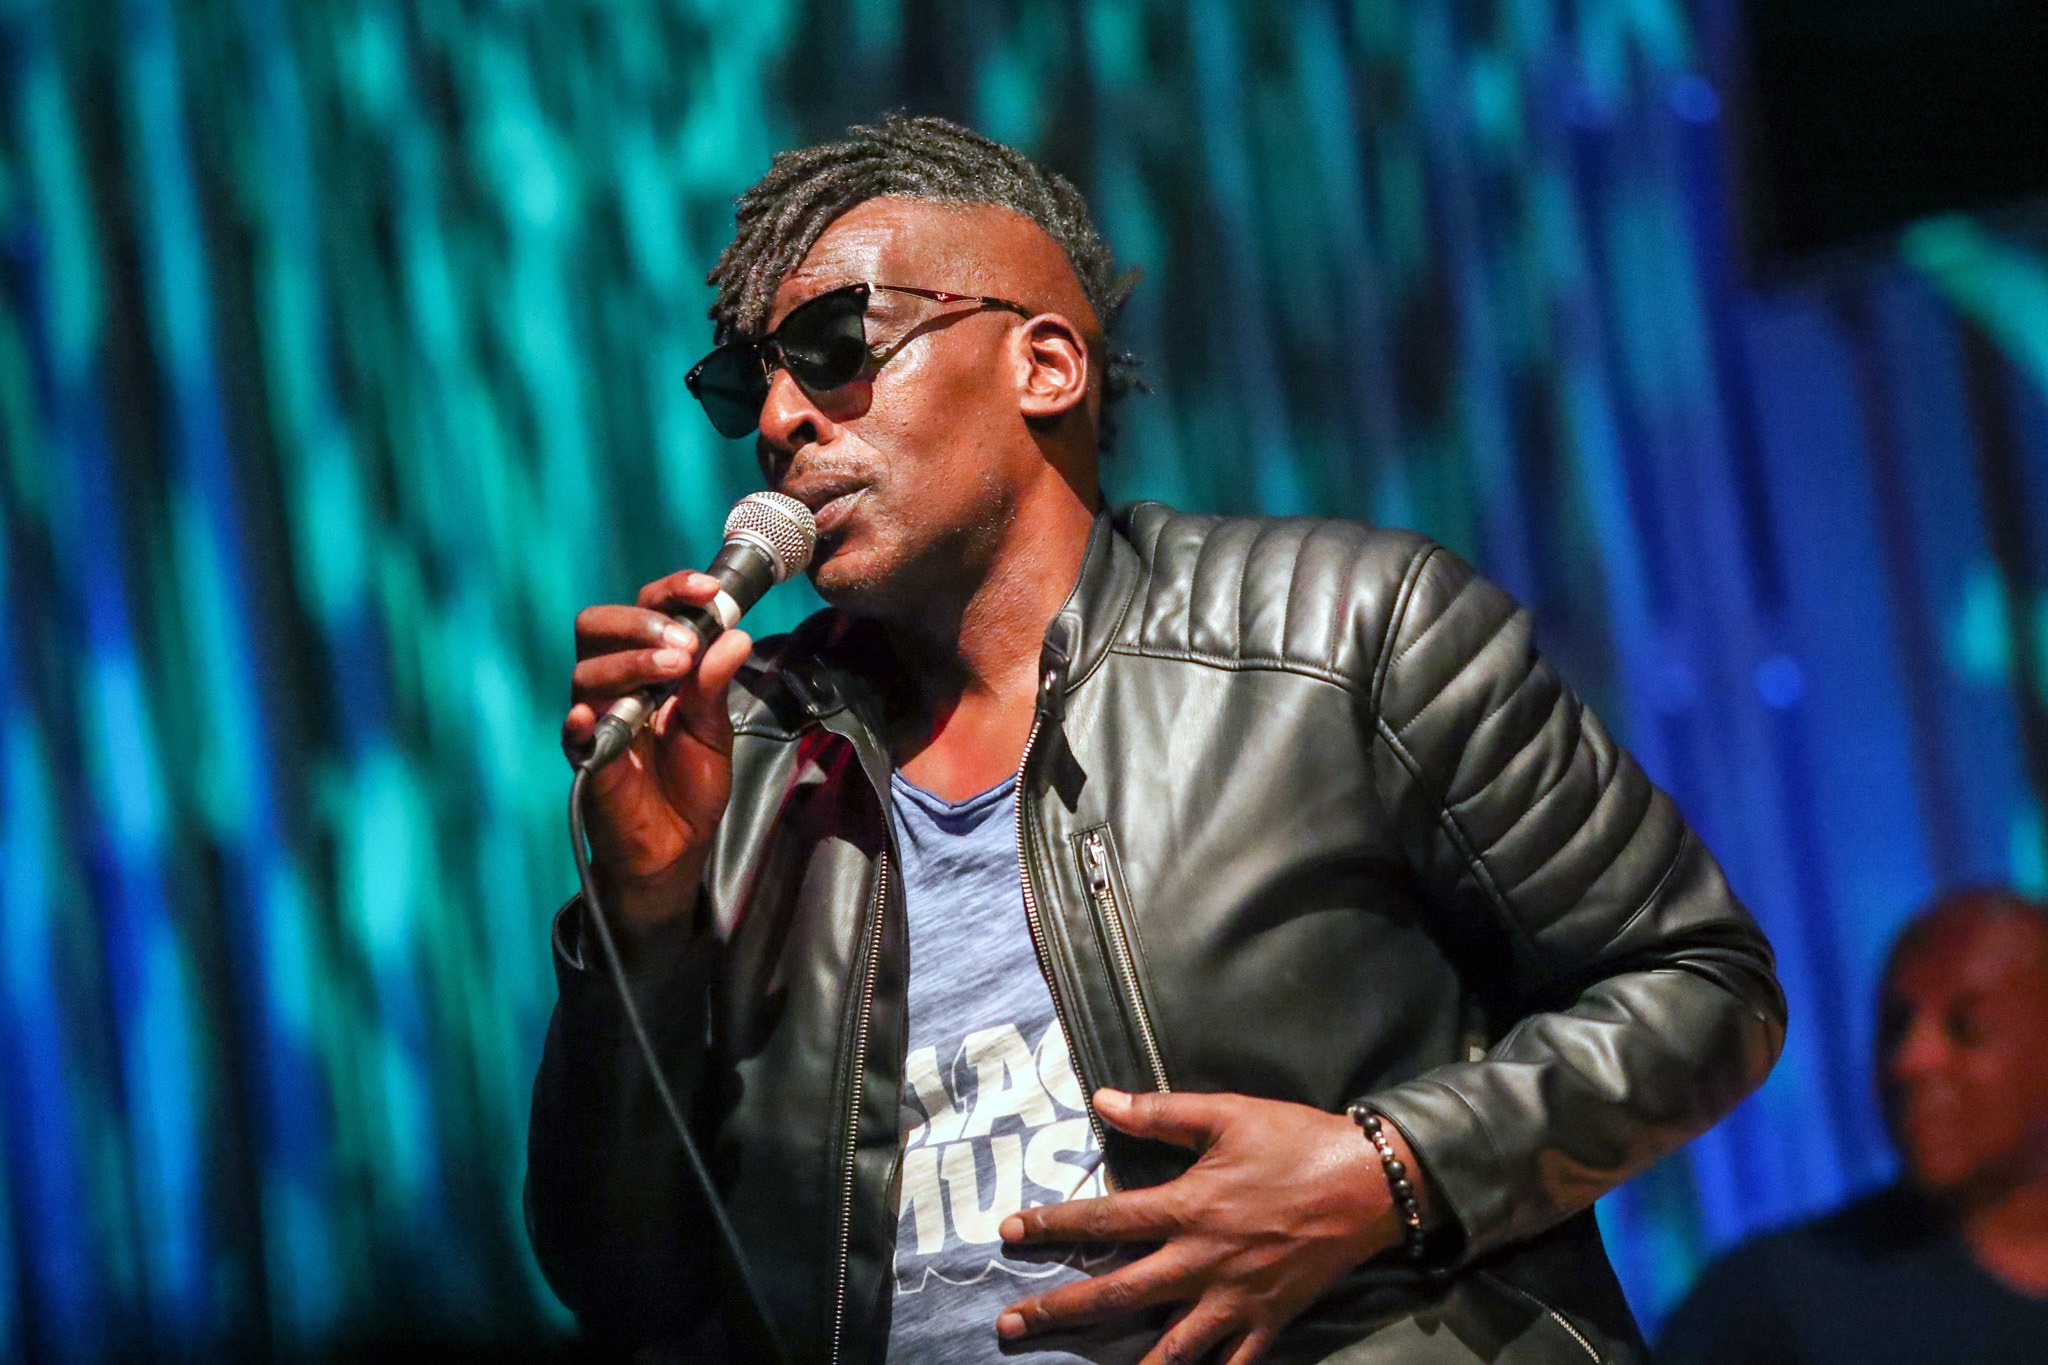 LIVE: Cleveland Watkiss: The Great Jamaican Songbook – Howard Assembly Room, Leeds, 29/10/2021